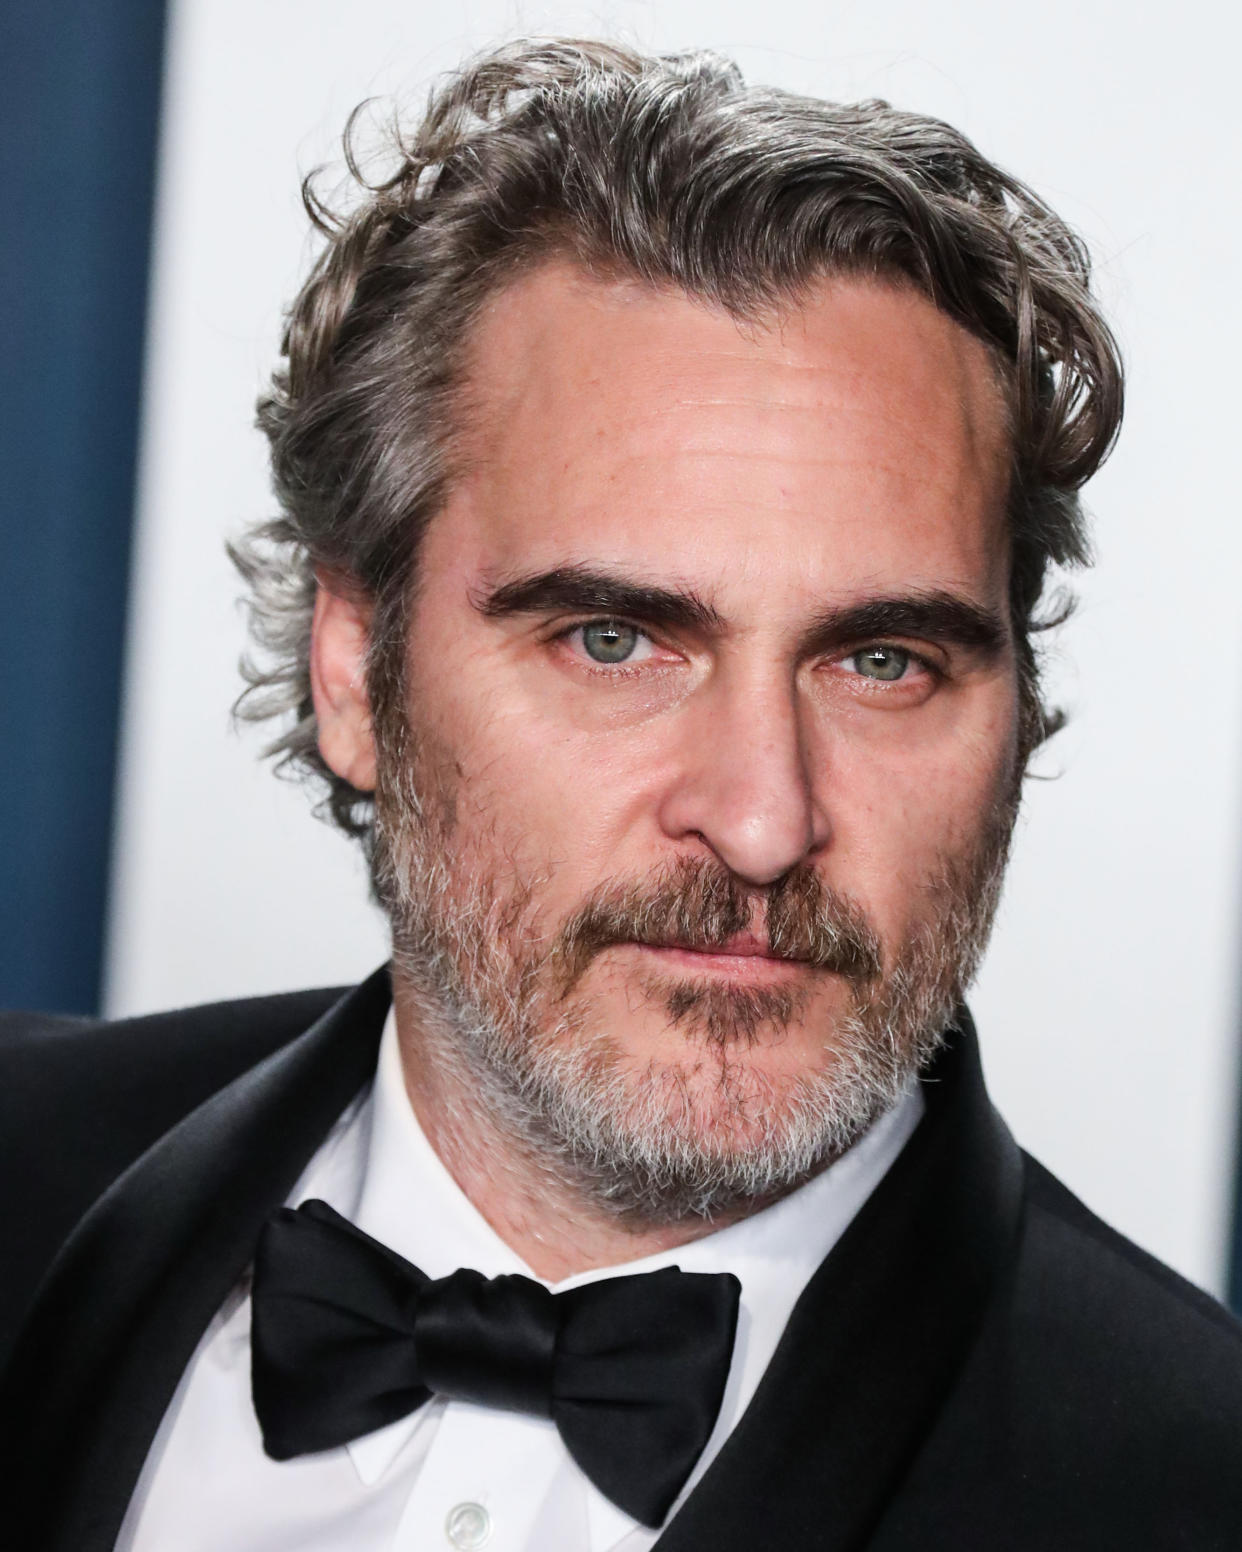 BEVERLY HILLS, LOS ANGELES, CALIFORNIA, USA - FEBRUARY 09: Joaquin Phoenix arrives at the 2020 Vanity Fair Oscar Party held at the Wallis Annenberg Center for the Performing Arts on February 9, 2020 in Beverly Hills, Los Angeles, California, United States. (Photo by Xavier Collin/Image Press Agency/Sipa USA)